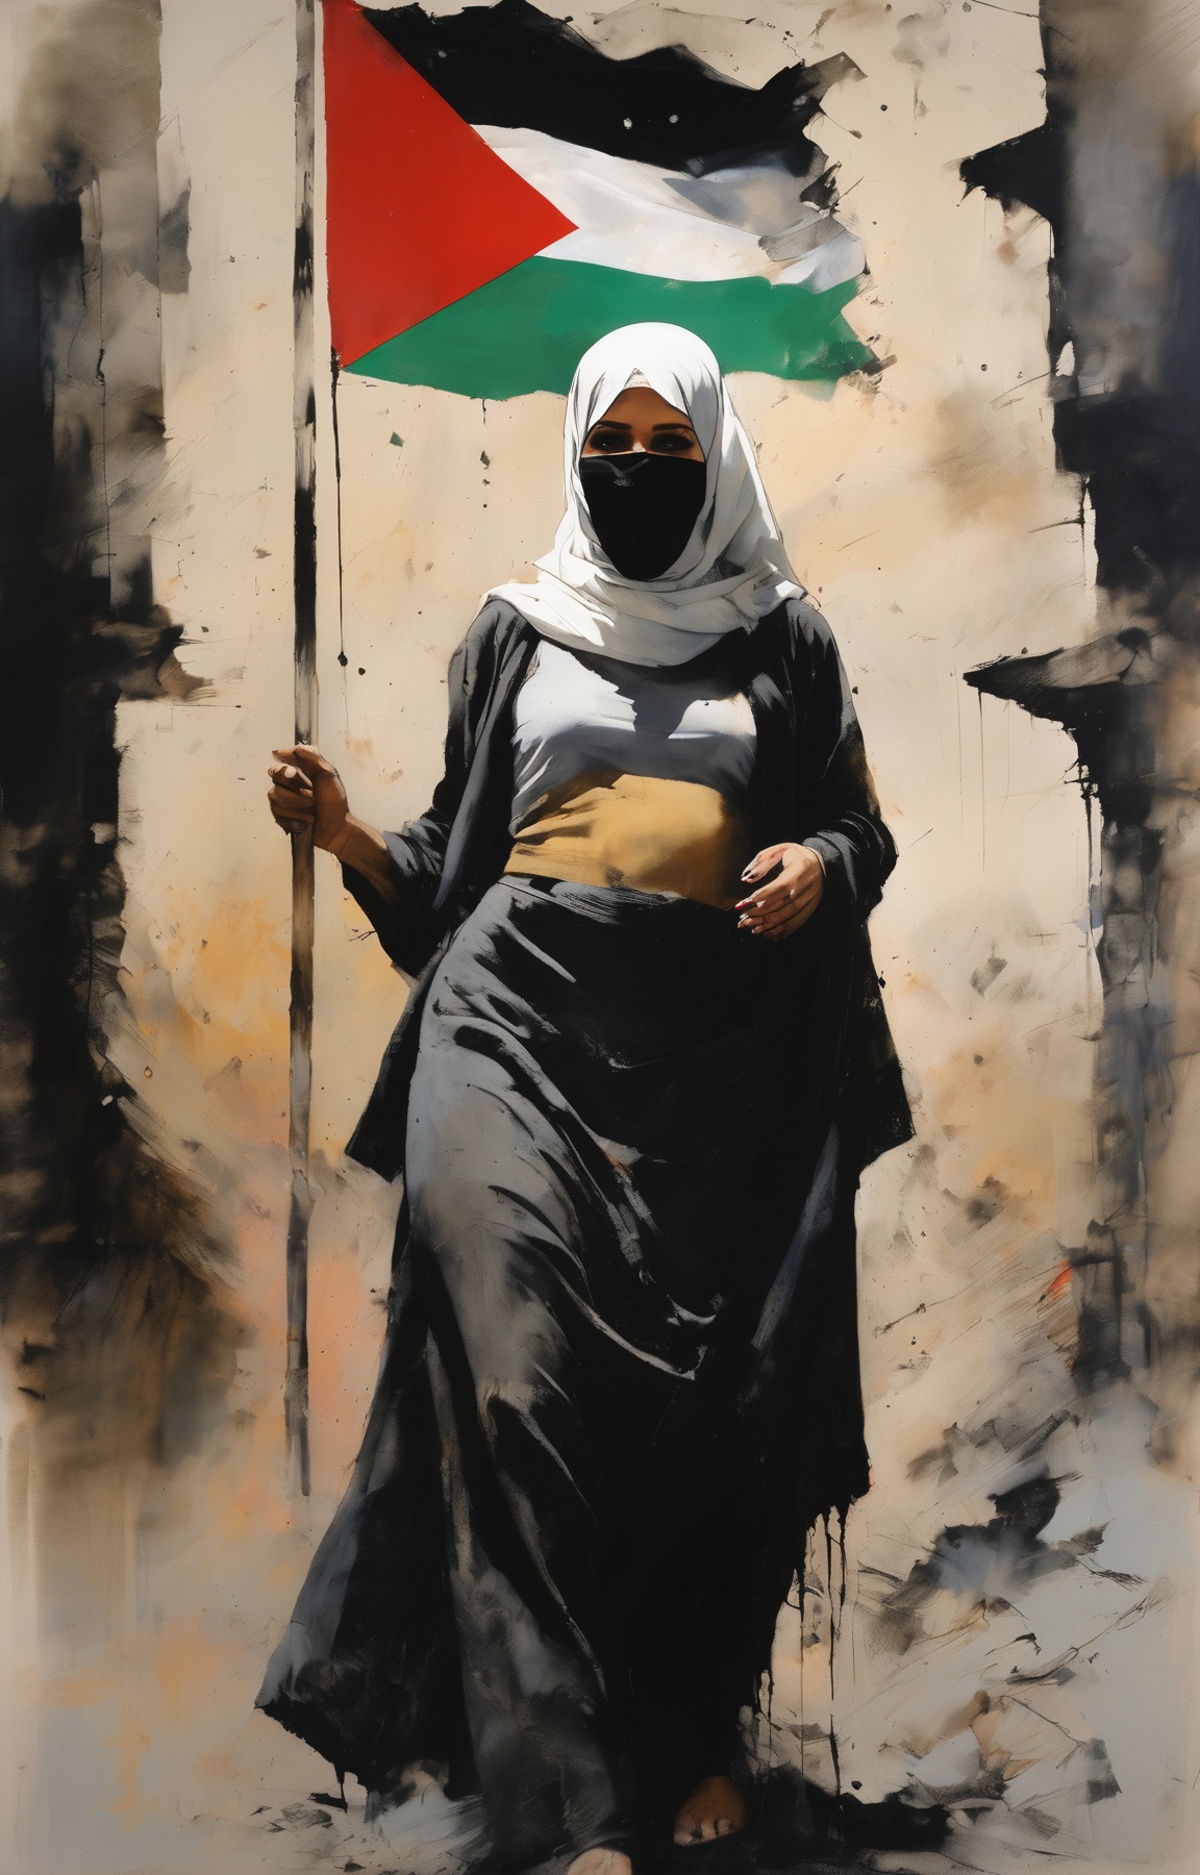 A woman wearing a burka and a green headscarf is holding a flag.